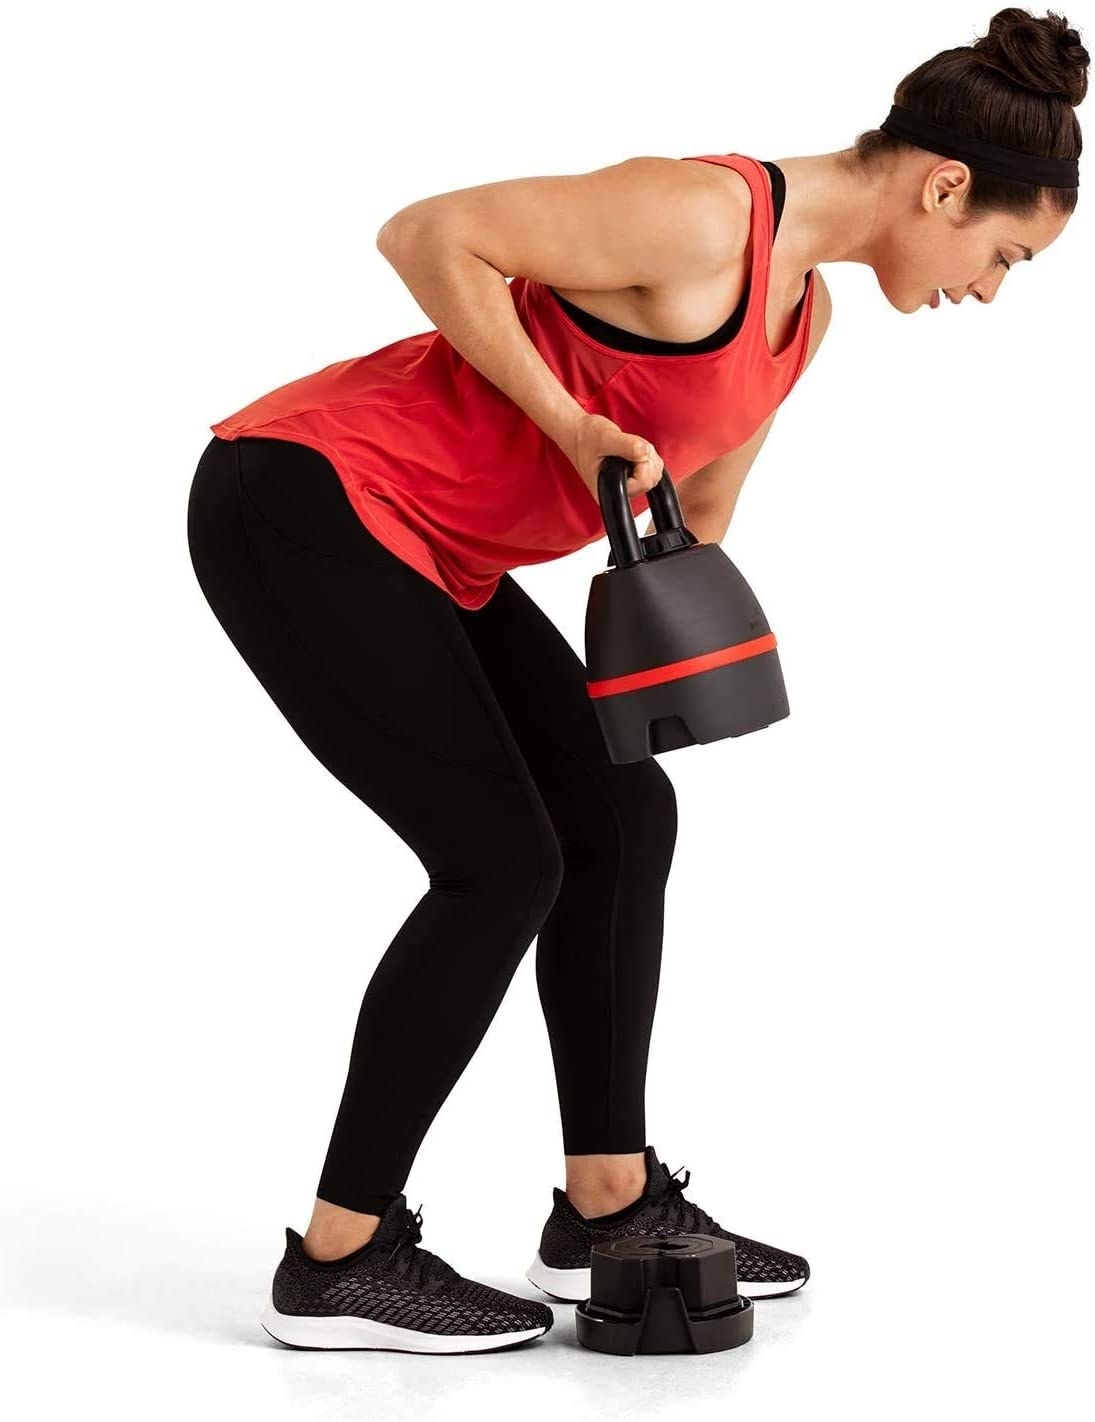 A model lifting a Bowflex kettlebell off the ground to work their arm